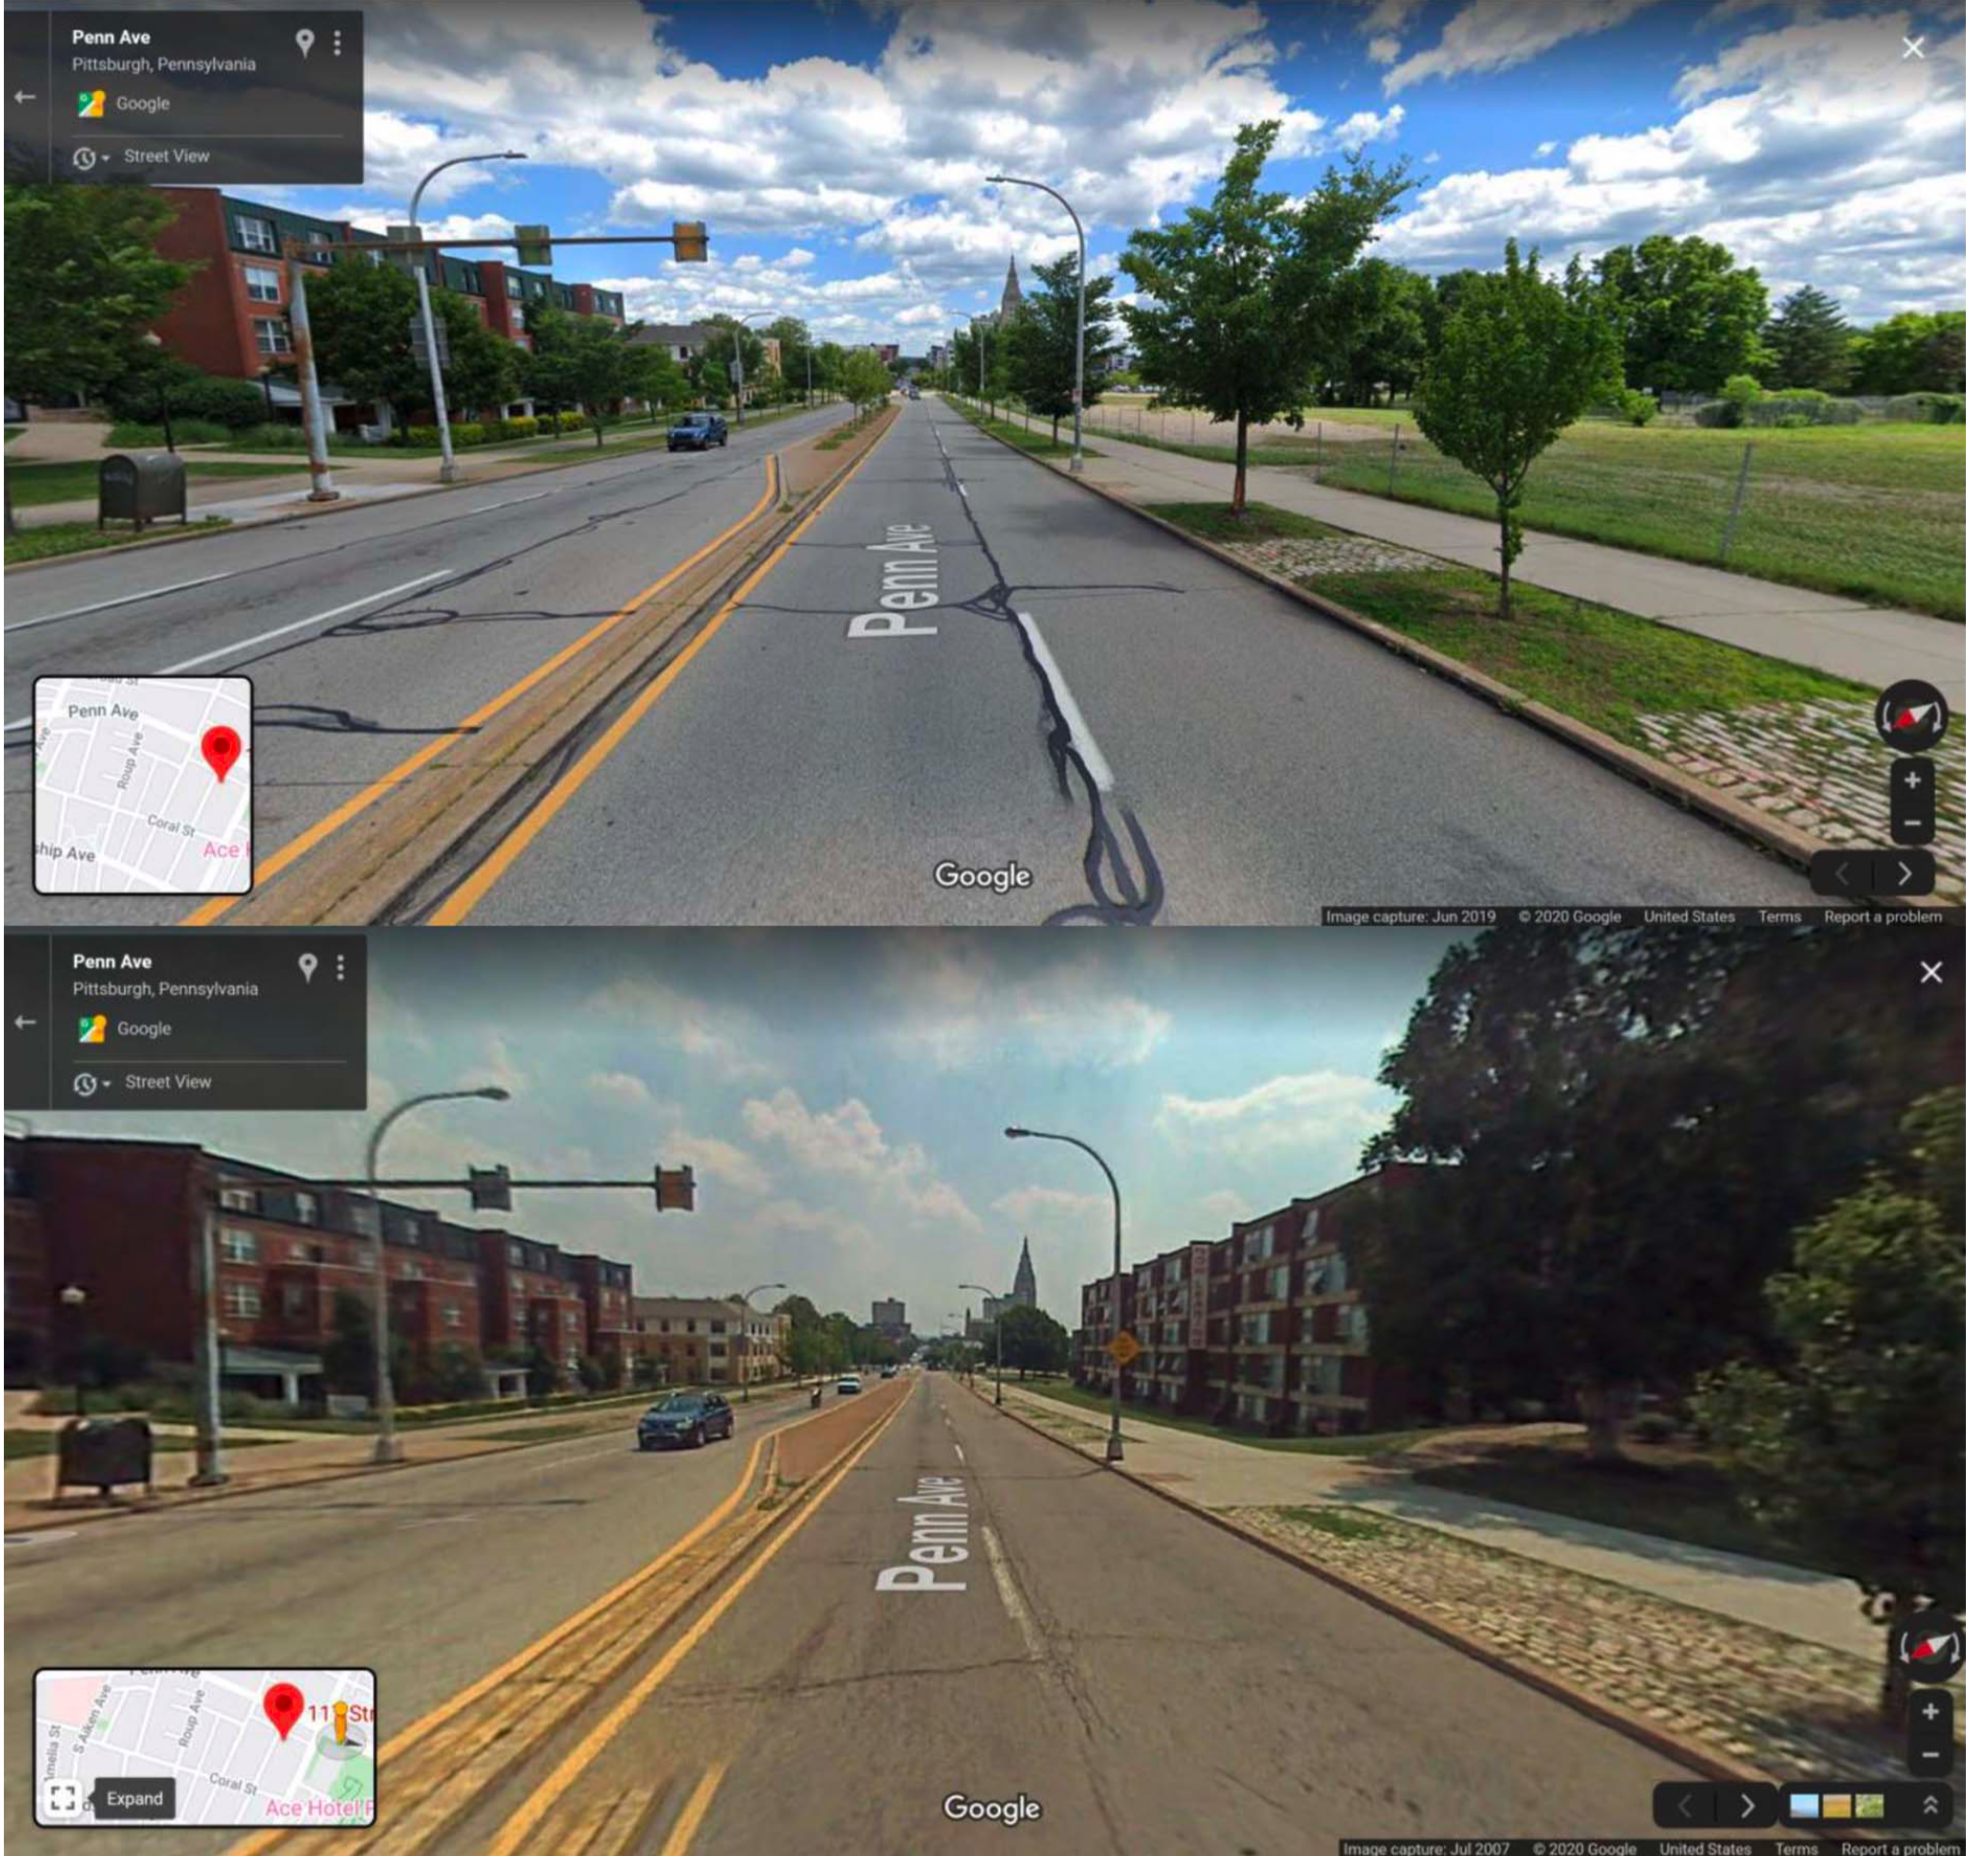 Google Street view images of two Pittsburg neighborhood streets